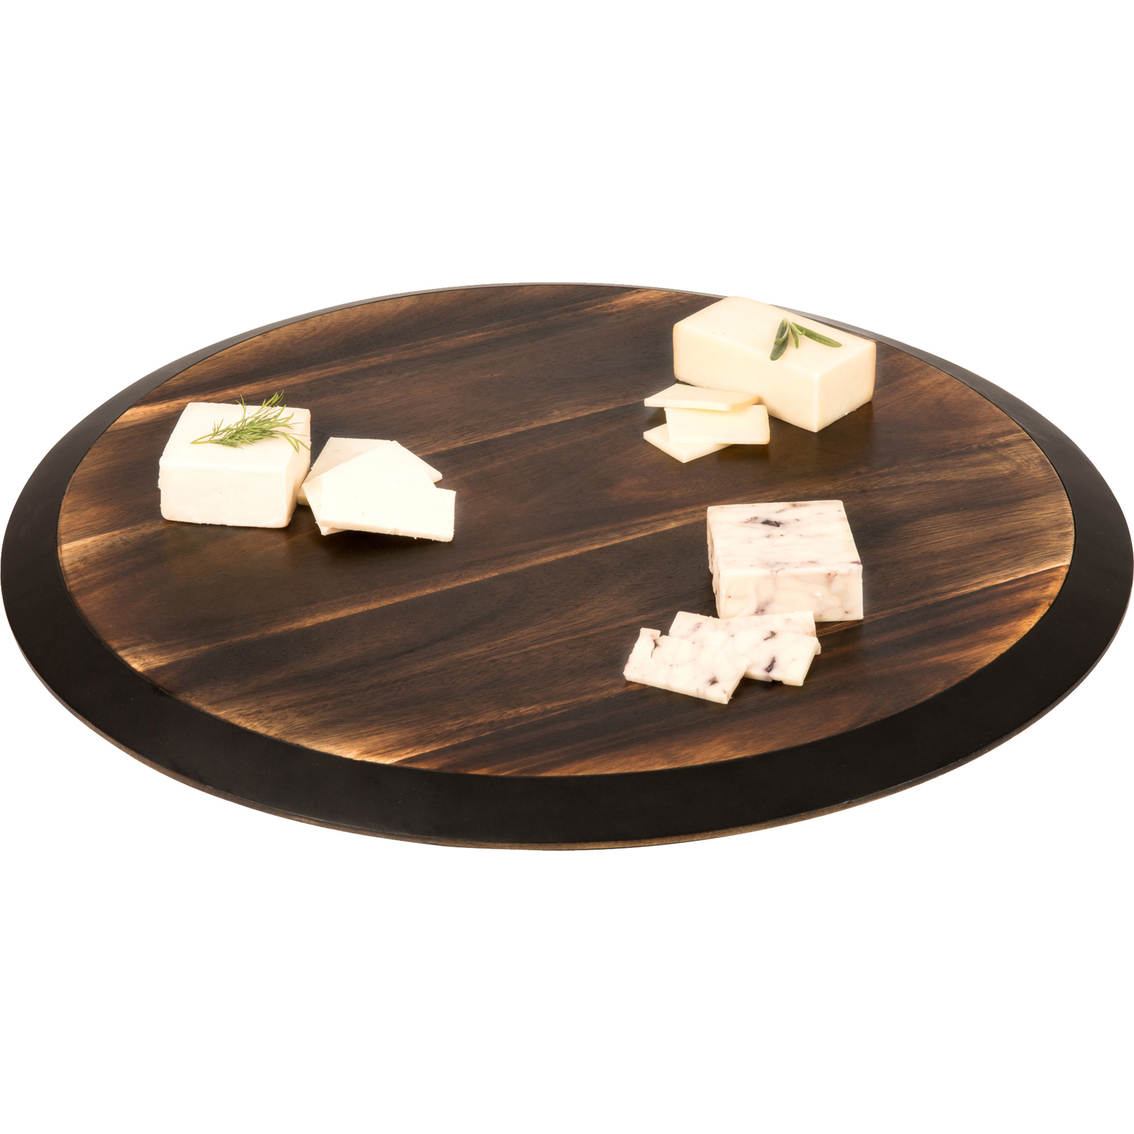 Picnic Time Toscana Lazy Susan Serving Tray - Image 2 of 7